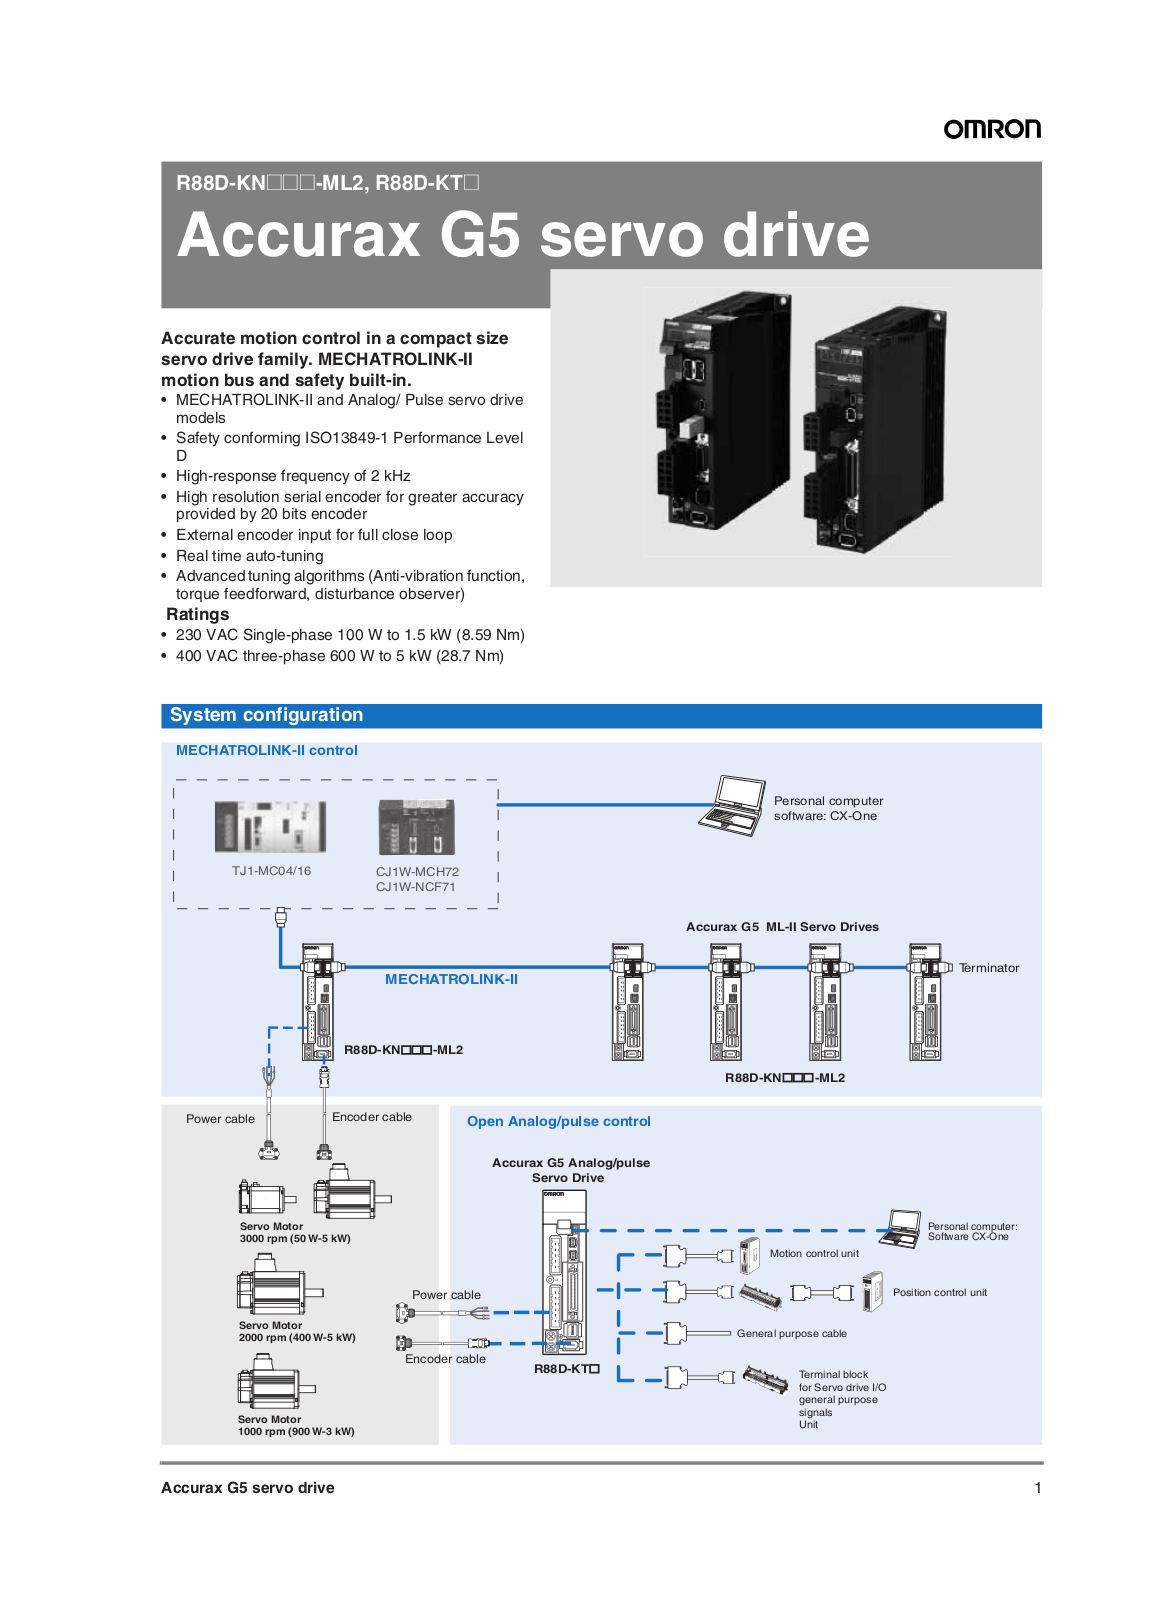 Omron ACCURAX G5 Specifications